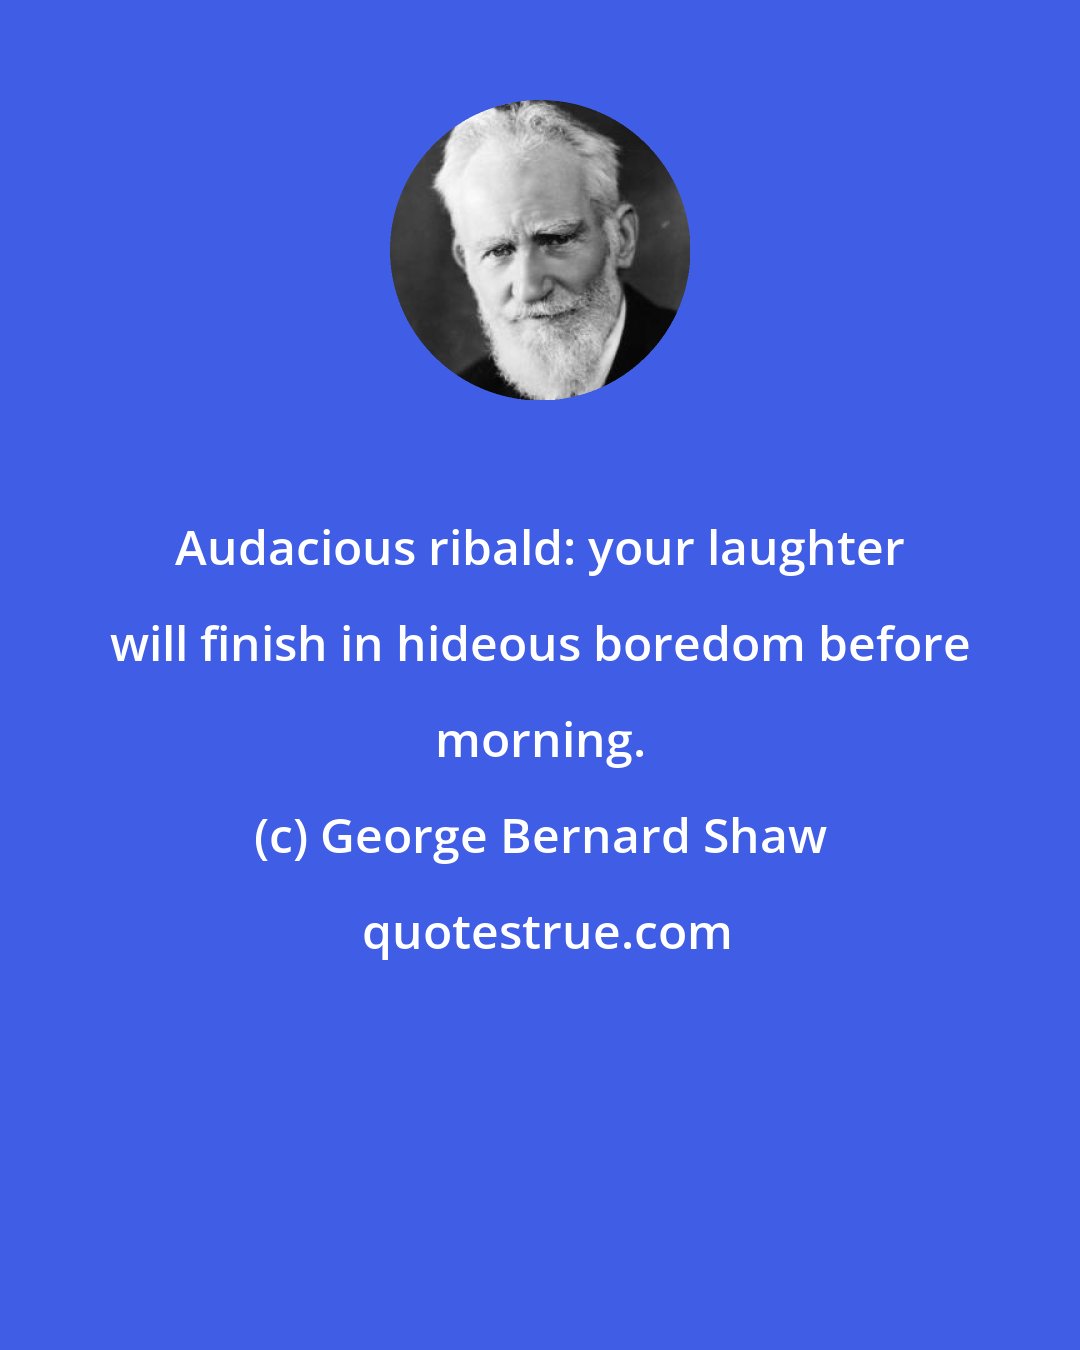 George Bernard Shaw: Audacious ribald: your laughter will finish in hideous boredom before morning.